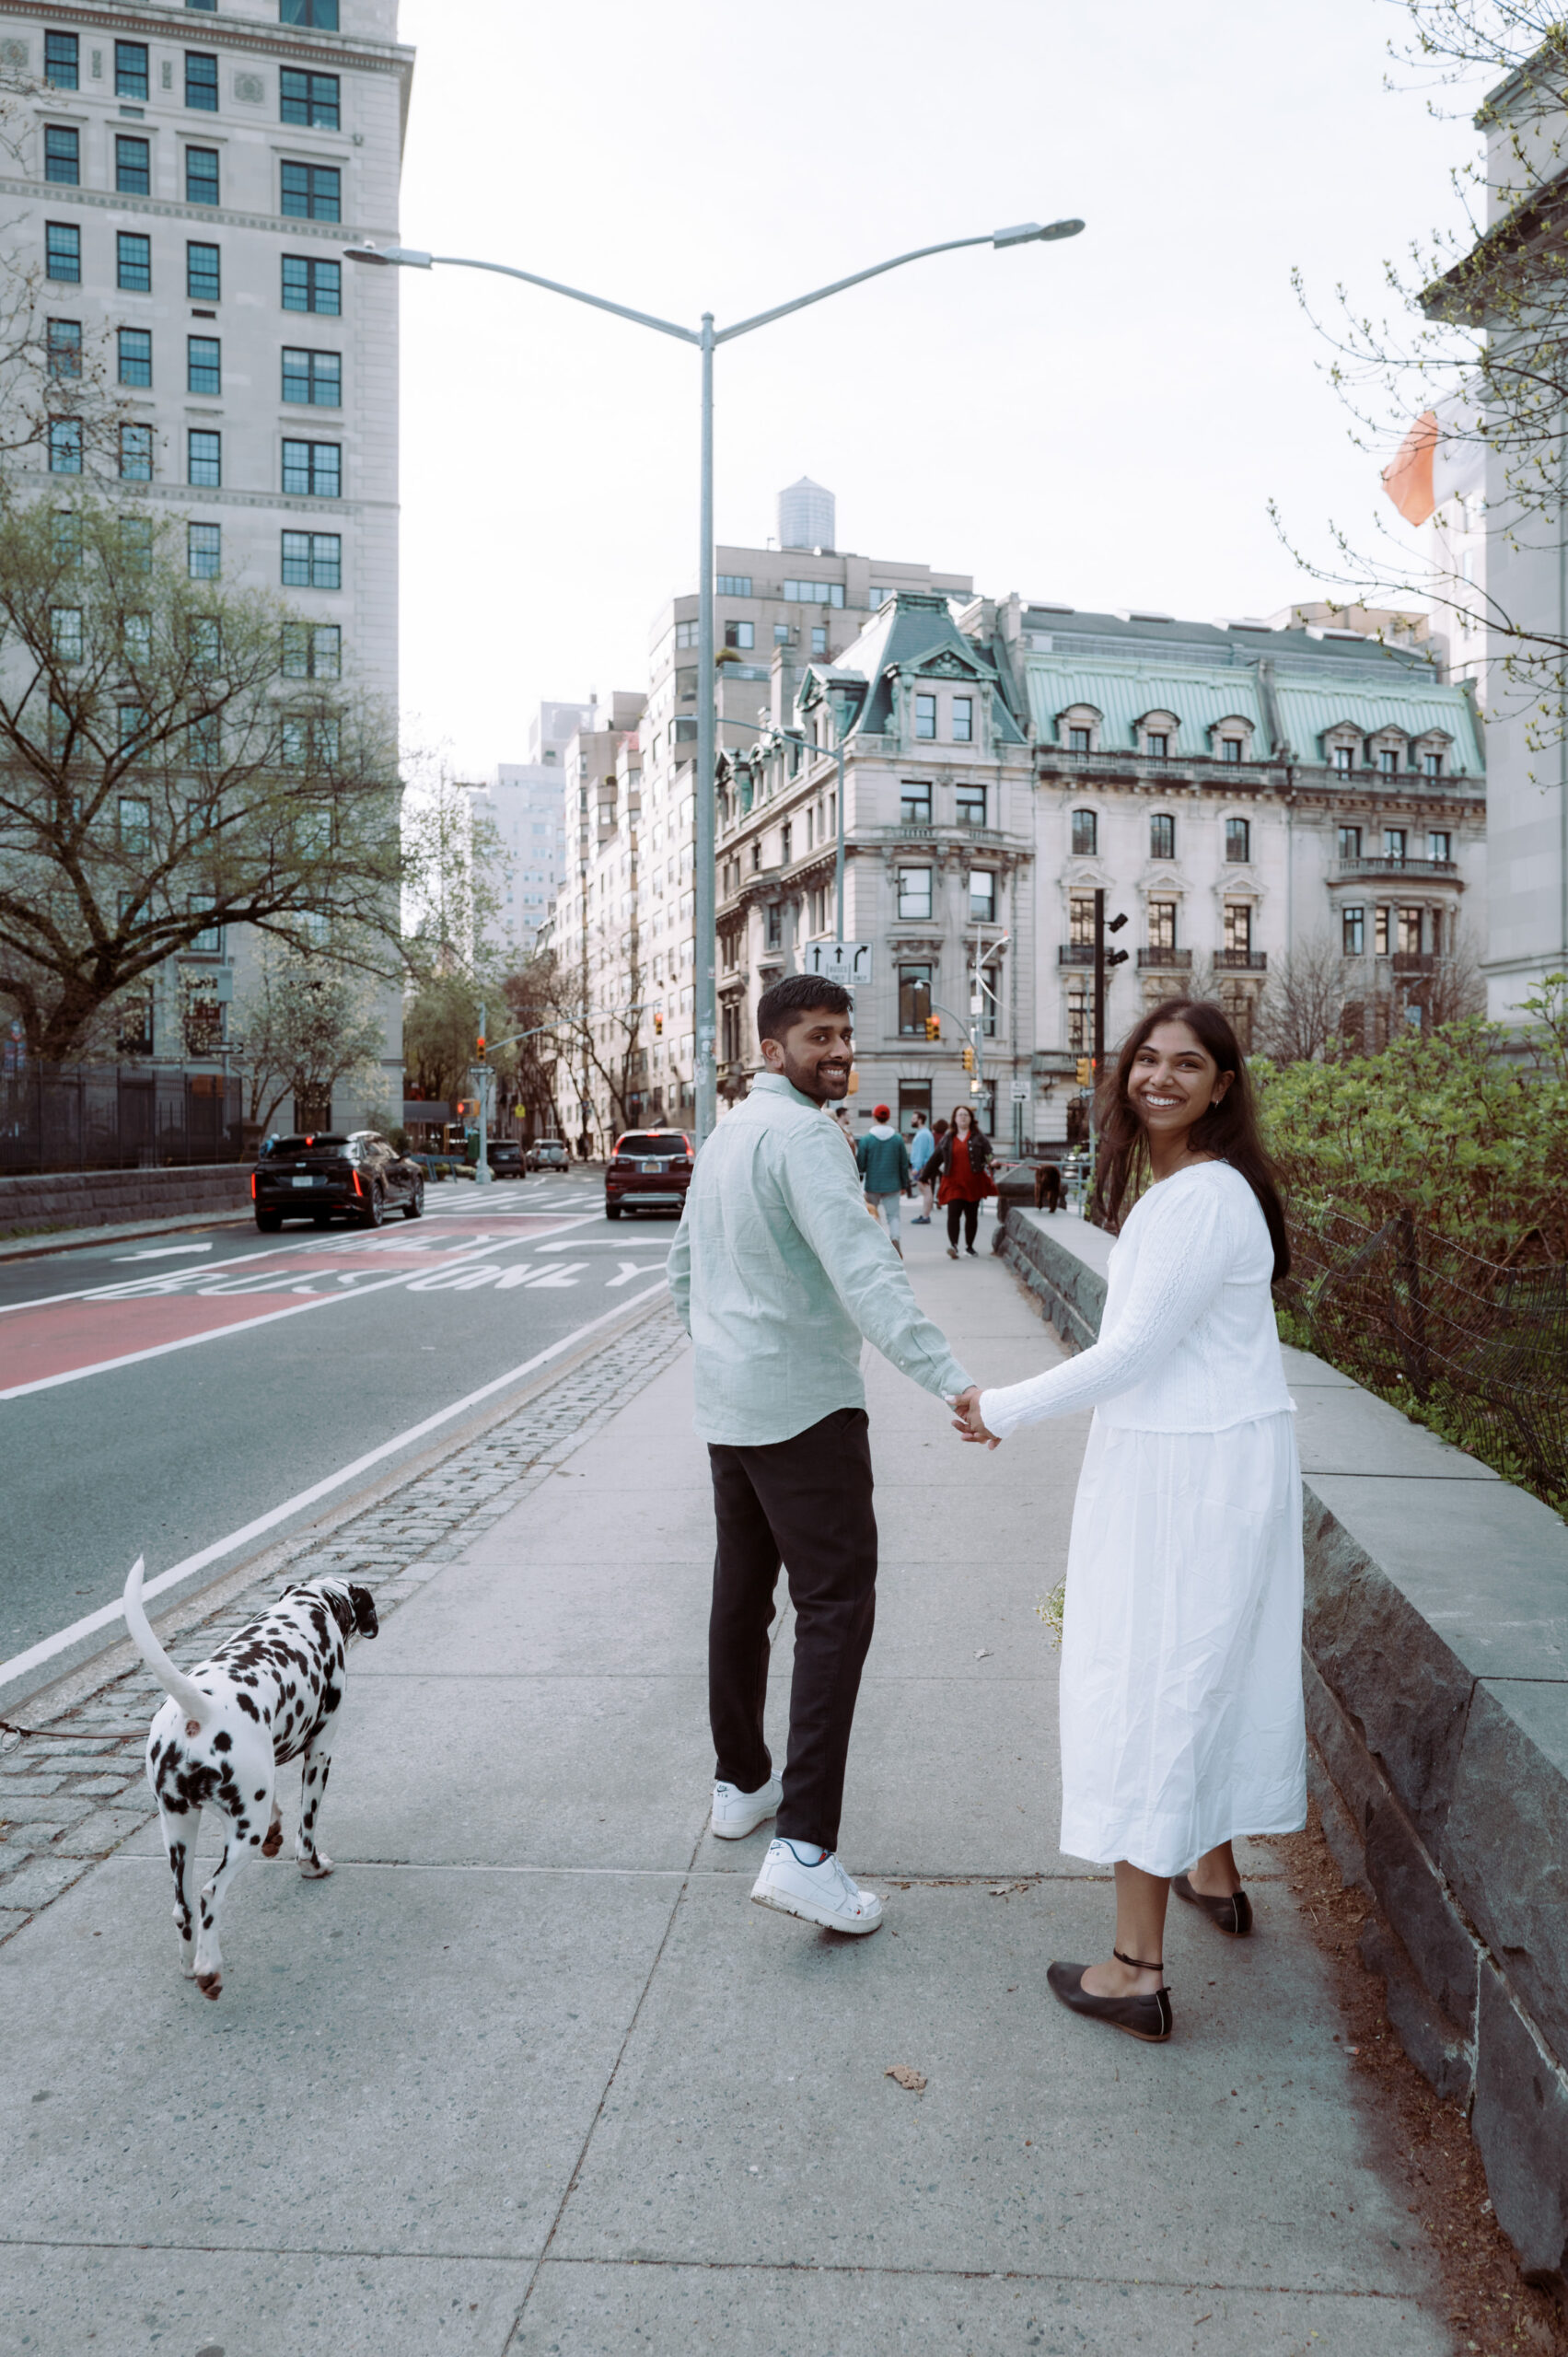 The engaged couple is walking hand in hand in a NYC sidewalk, with beautiful buildings in the background.